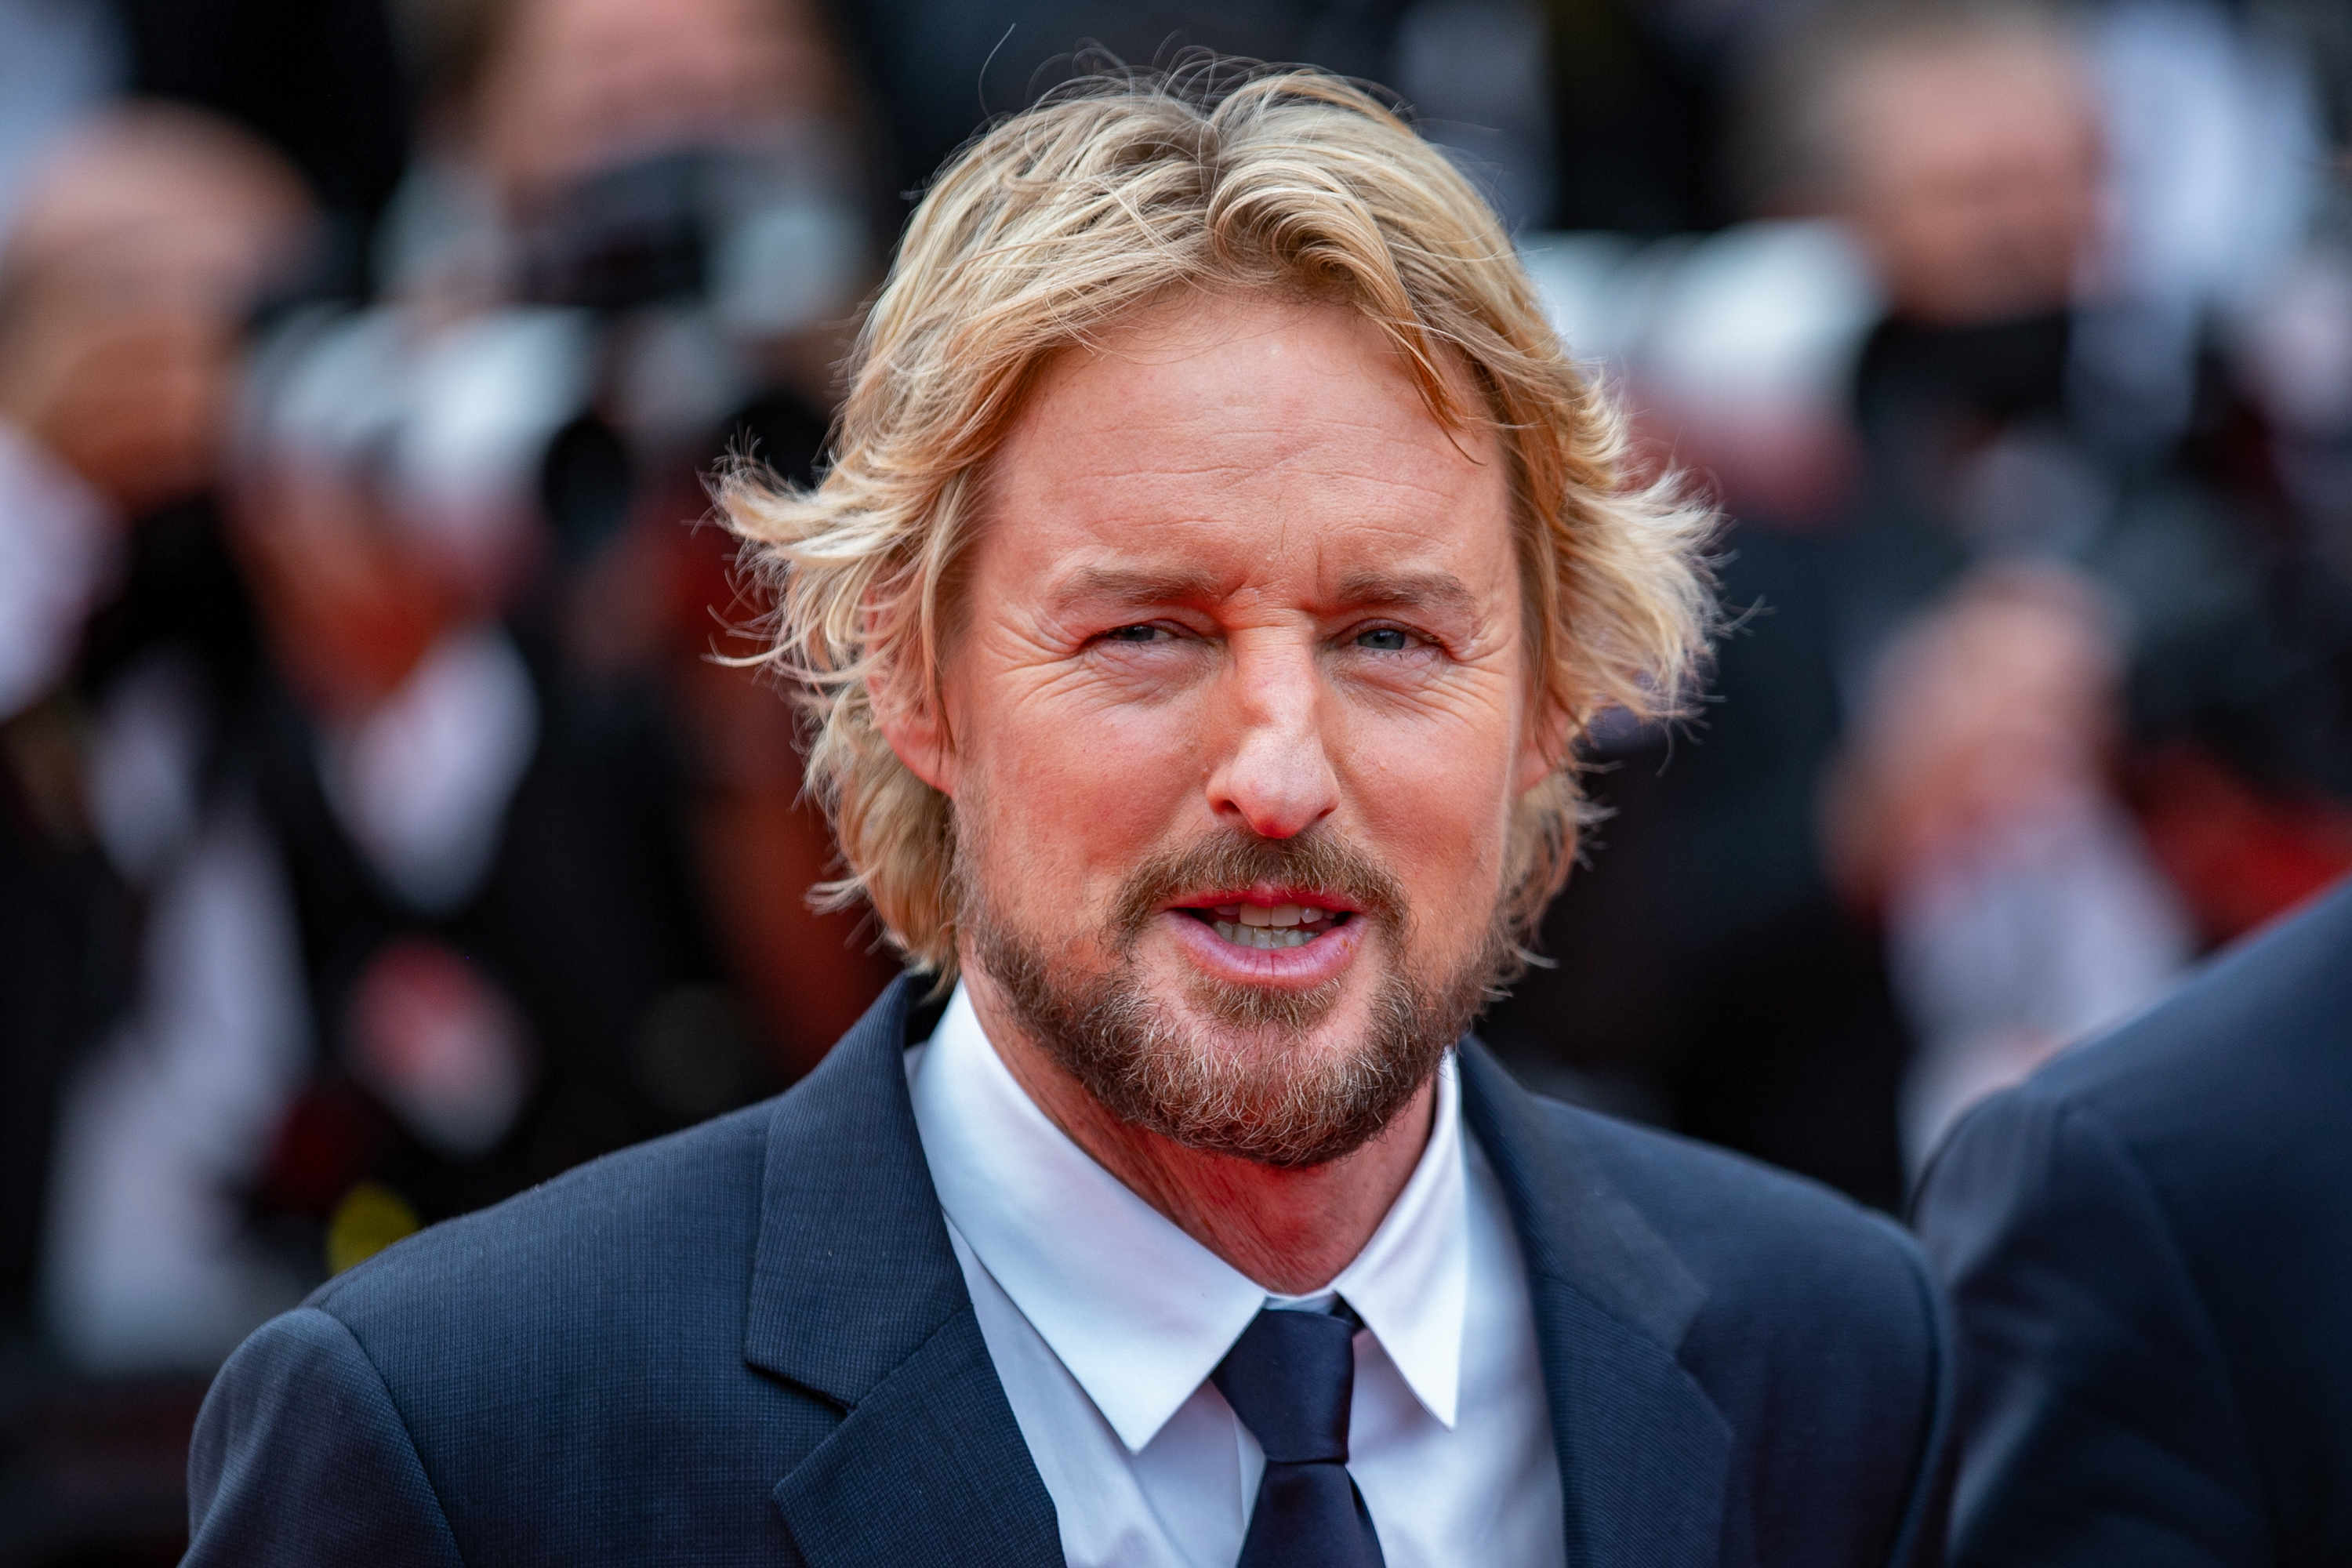 Actor Owen Wilson on July 12, 2021, in Cannes, France | Source: Getty Images